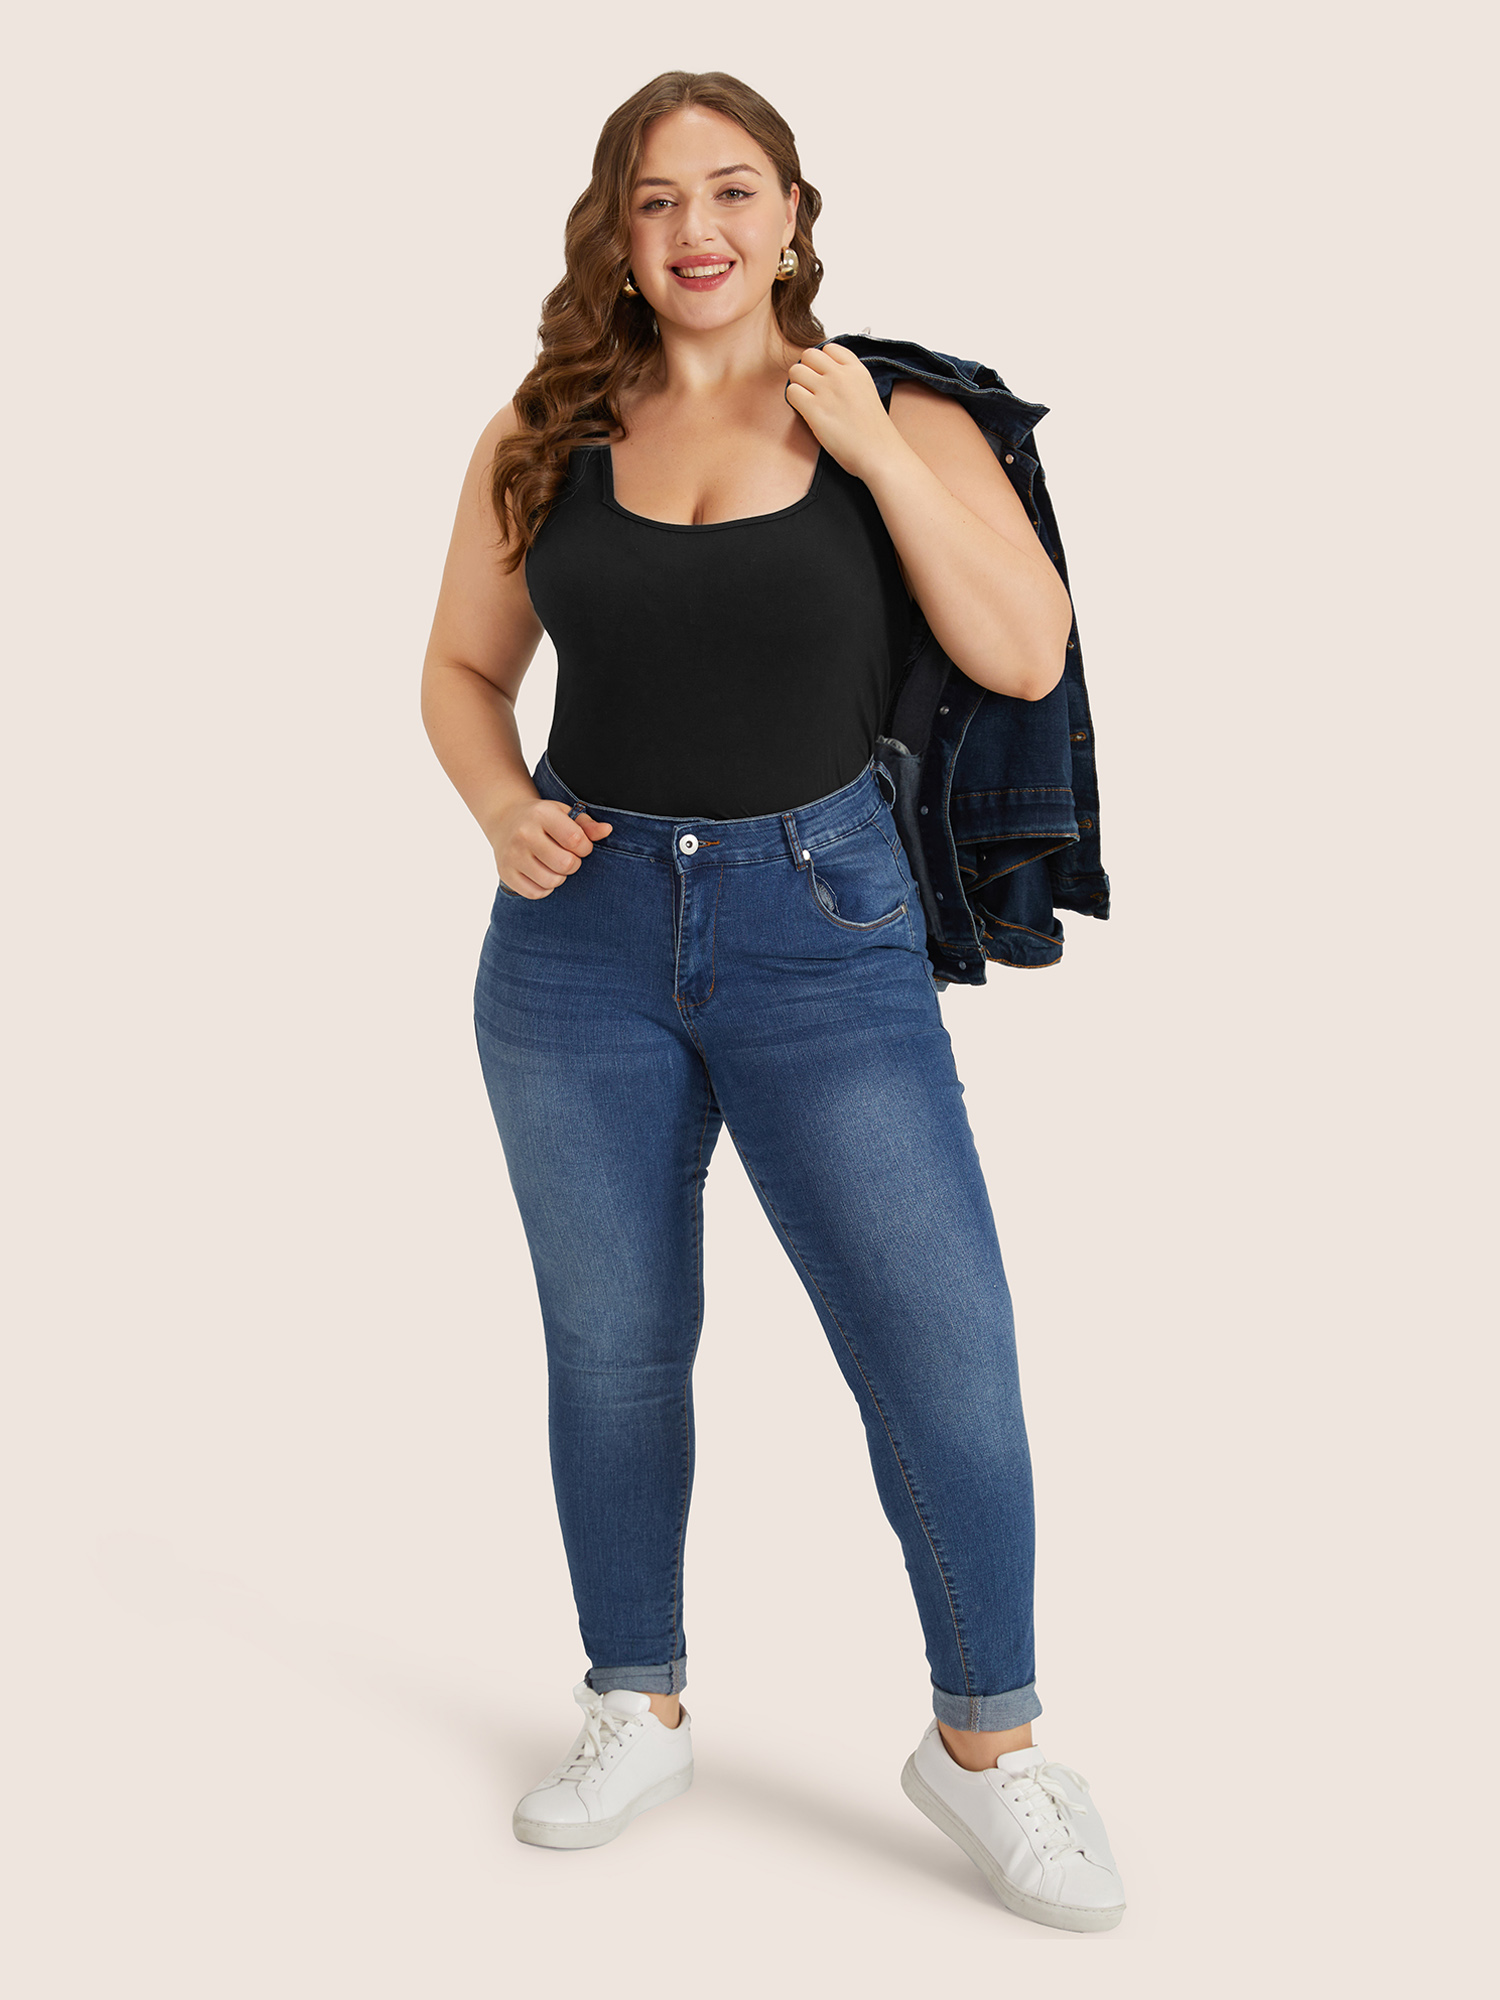 

Plus Size Supersoft Essentials Plain Square Neck Skinny Tank Top Women Black Basics Non Square Neck Everyday Tank Tops Camis BloomChic